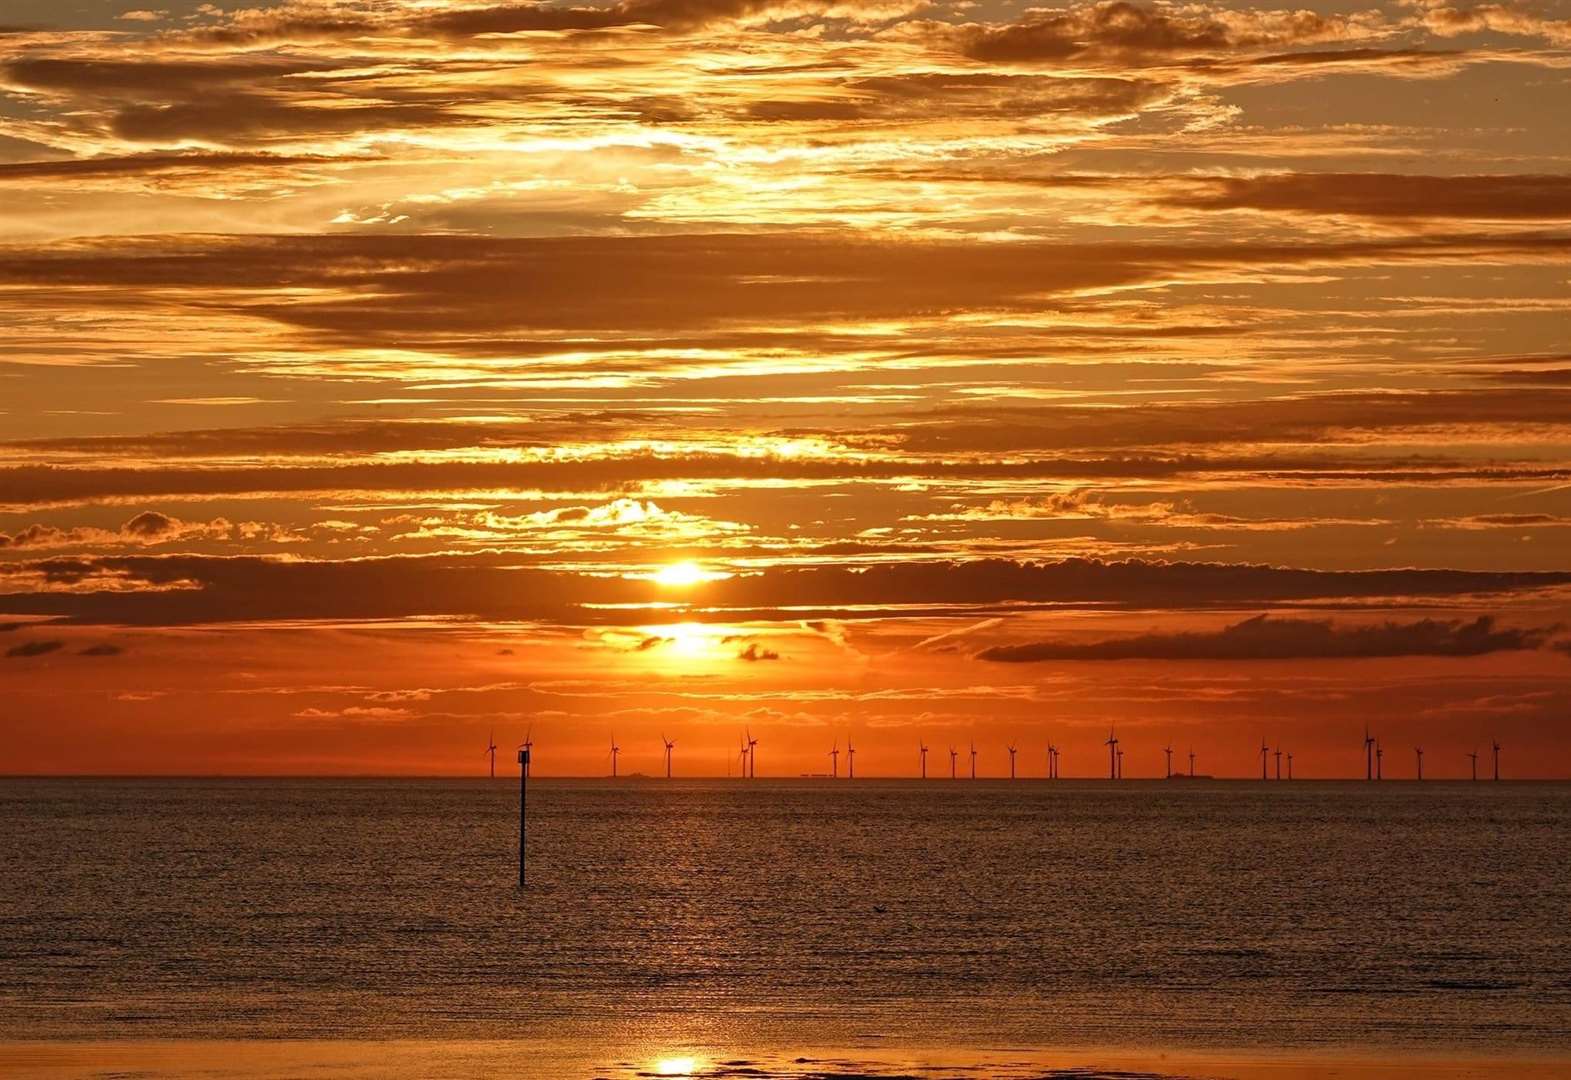 Wind turbines captured in the distance. Pic: Jane White.